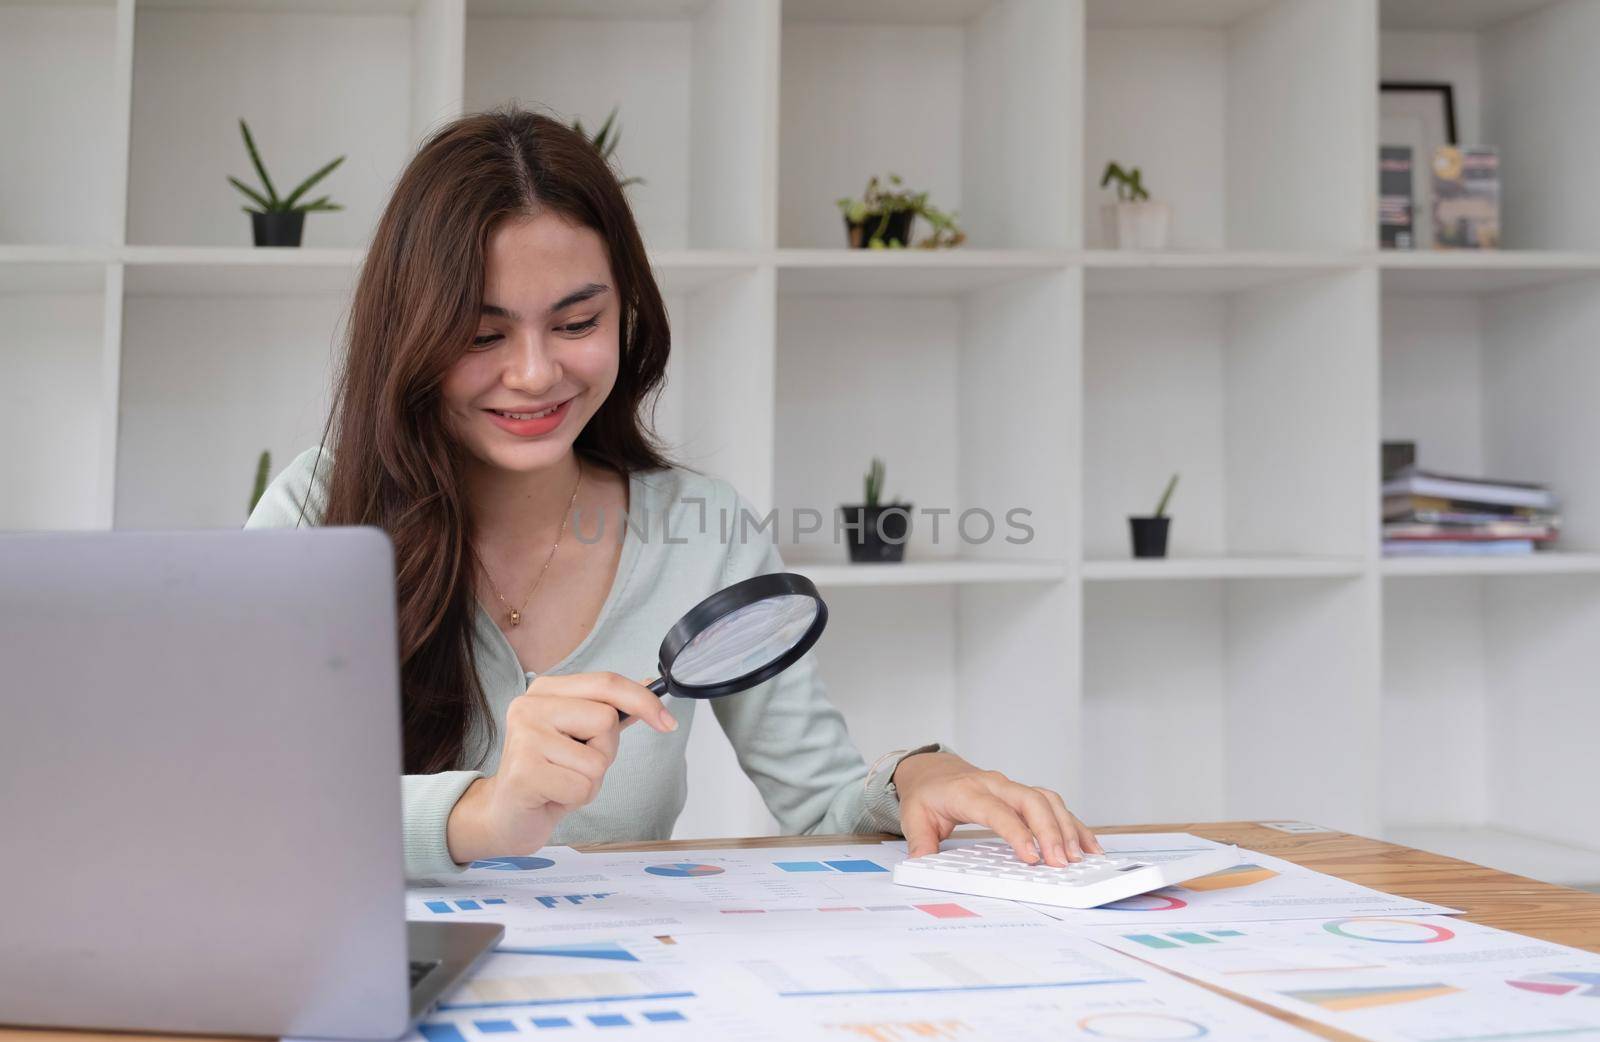 Tax inspector and financial auditor looking through magnifying glass, inspecting company financial papers, documents and reports.